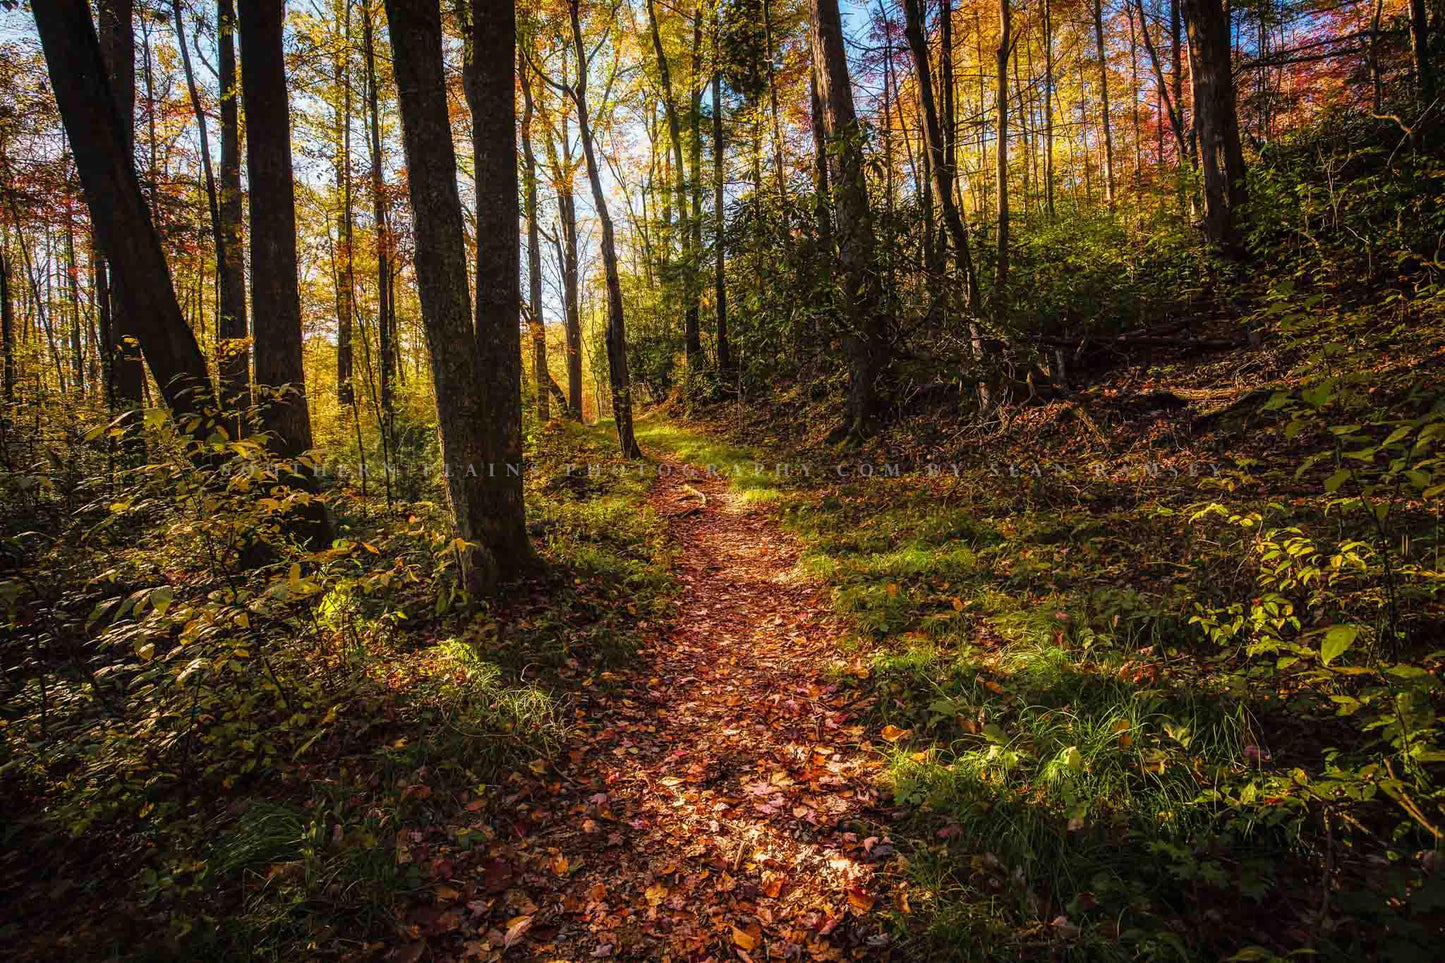 Nature photography print of a hiking trail covered in fallen leaves as it leads into a forest on an autumn day in the Great Smoky Mountains of Tennessee by Sean Ramsey of Southern Plains Photography.